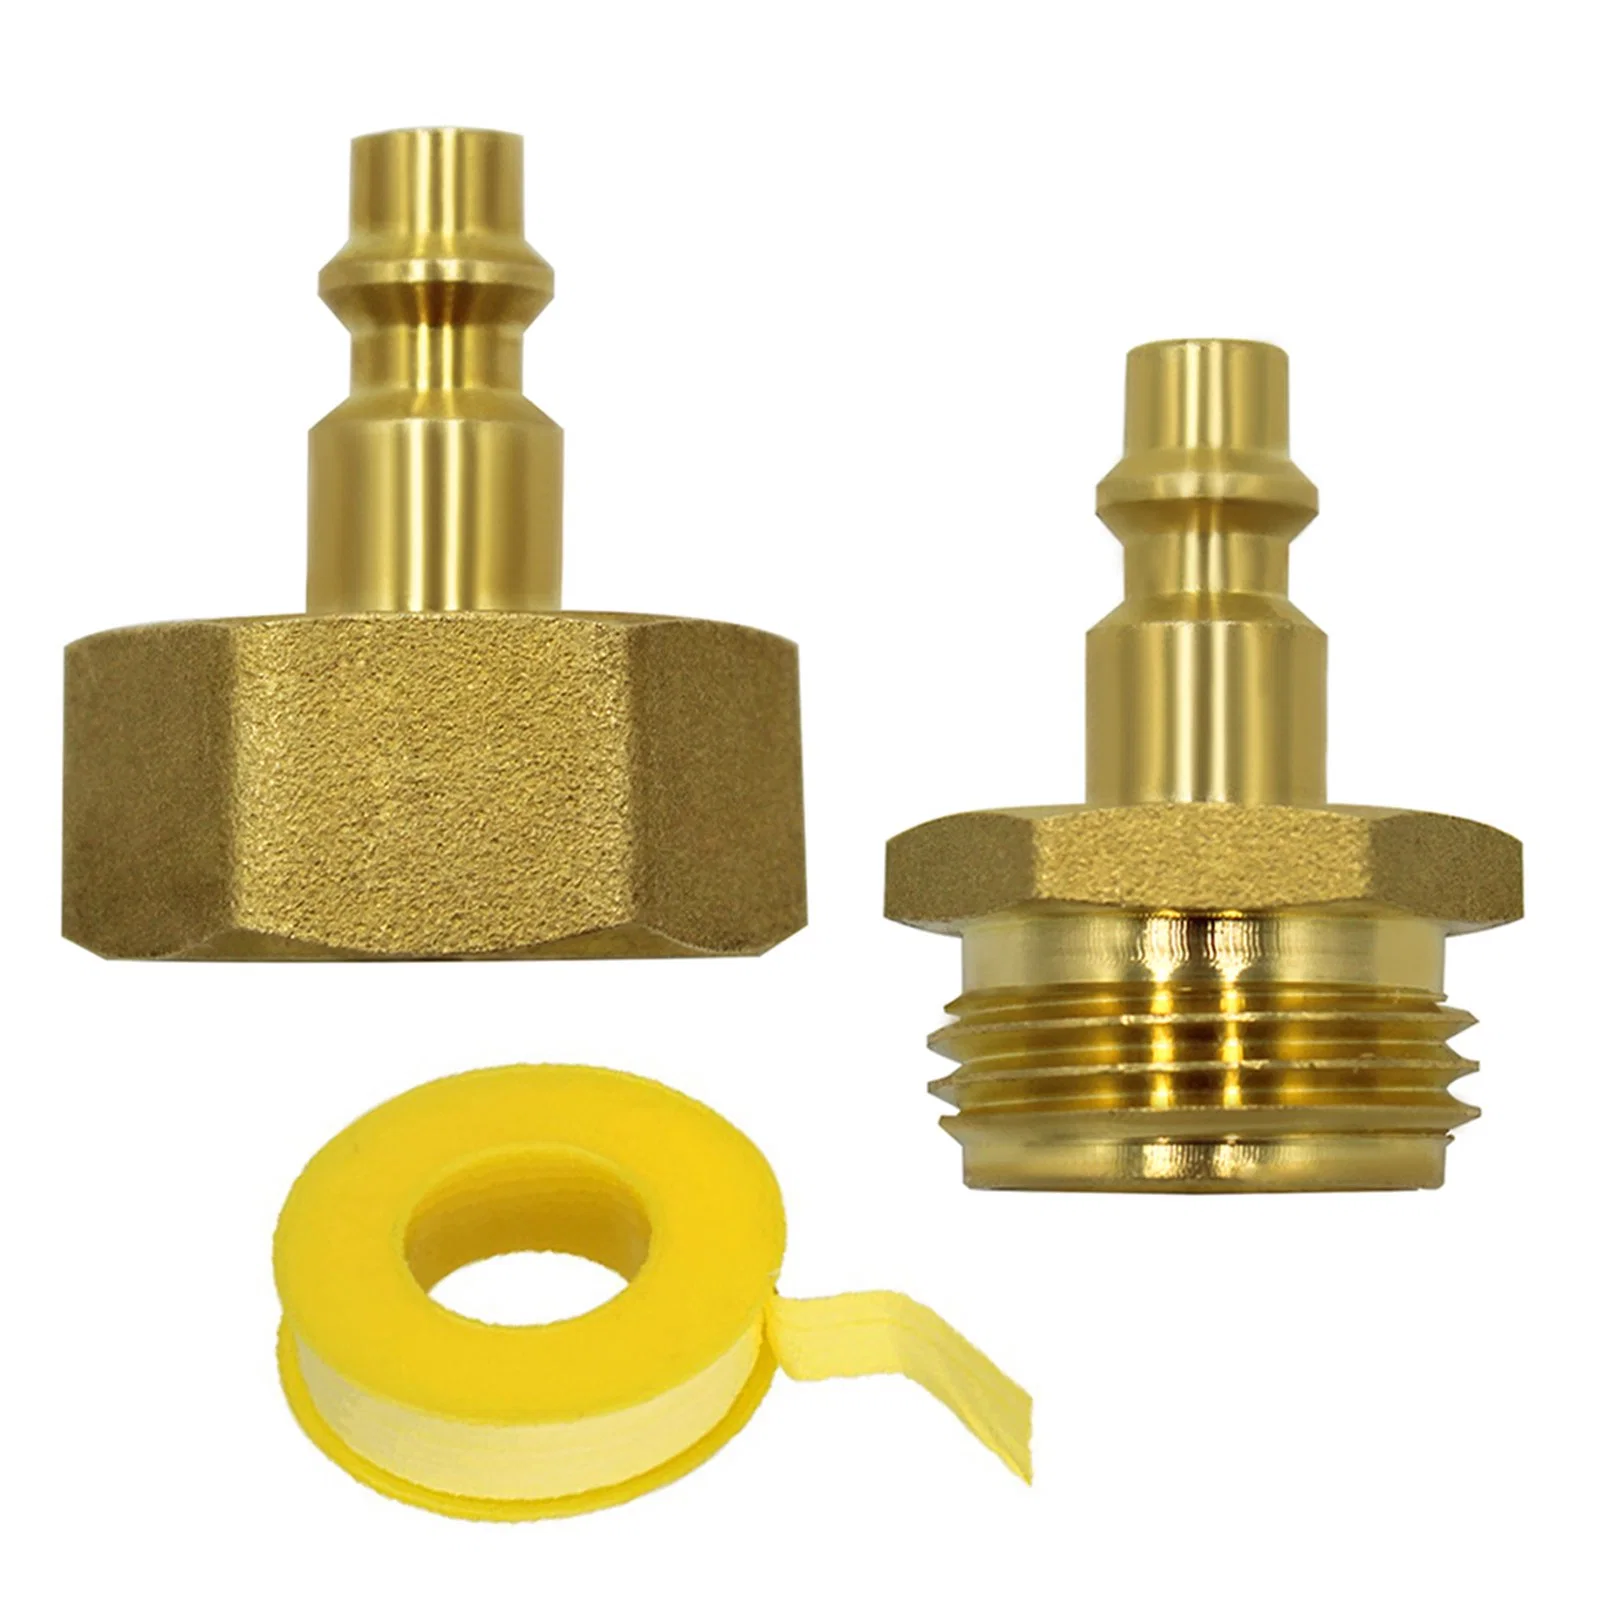 The Fine Quality Propane Adapter Quick Connect Winterize Fitting